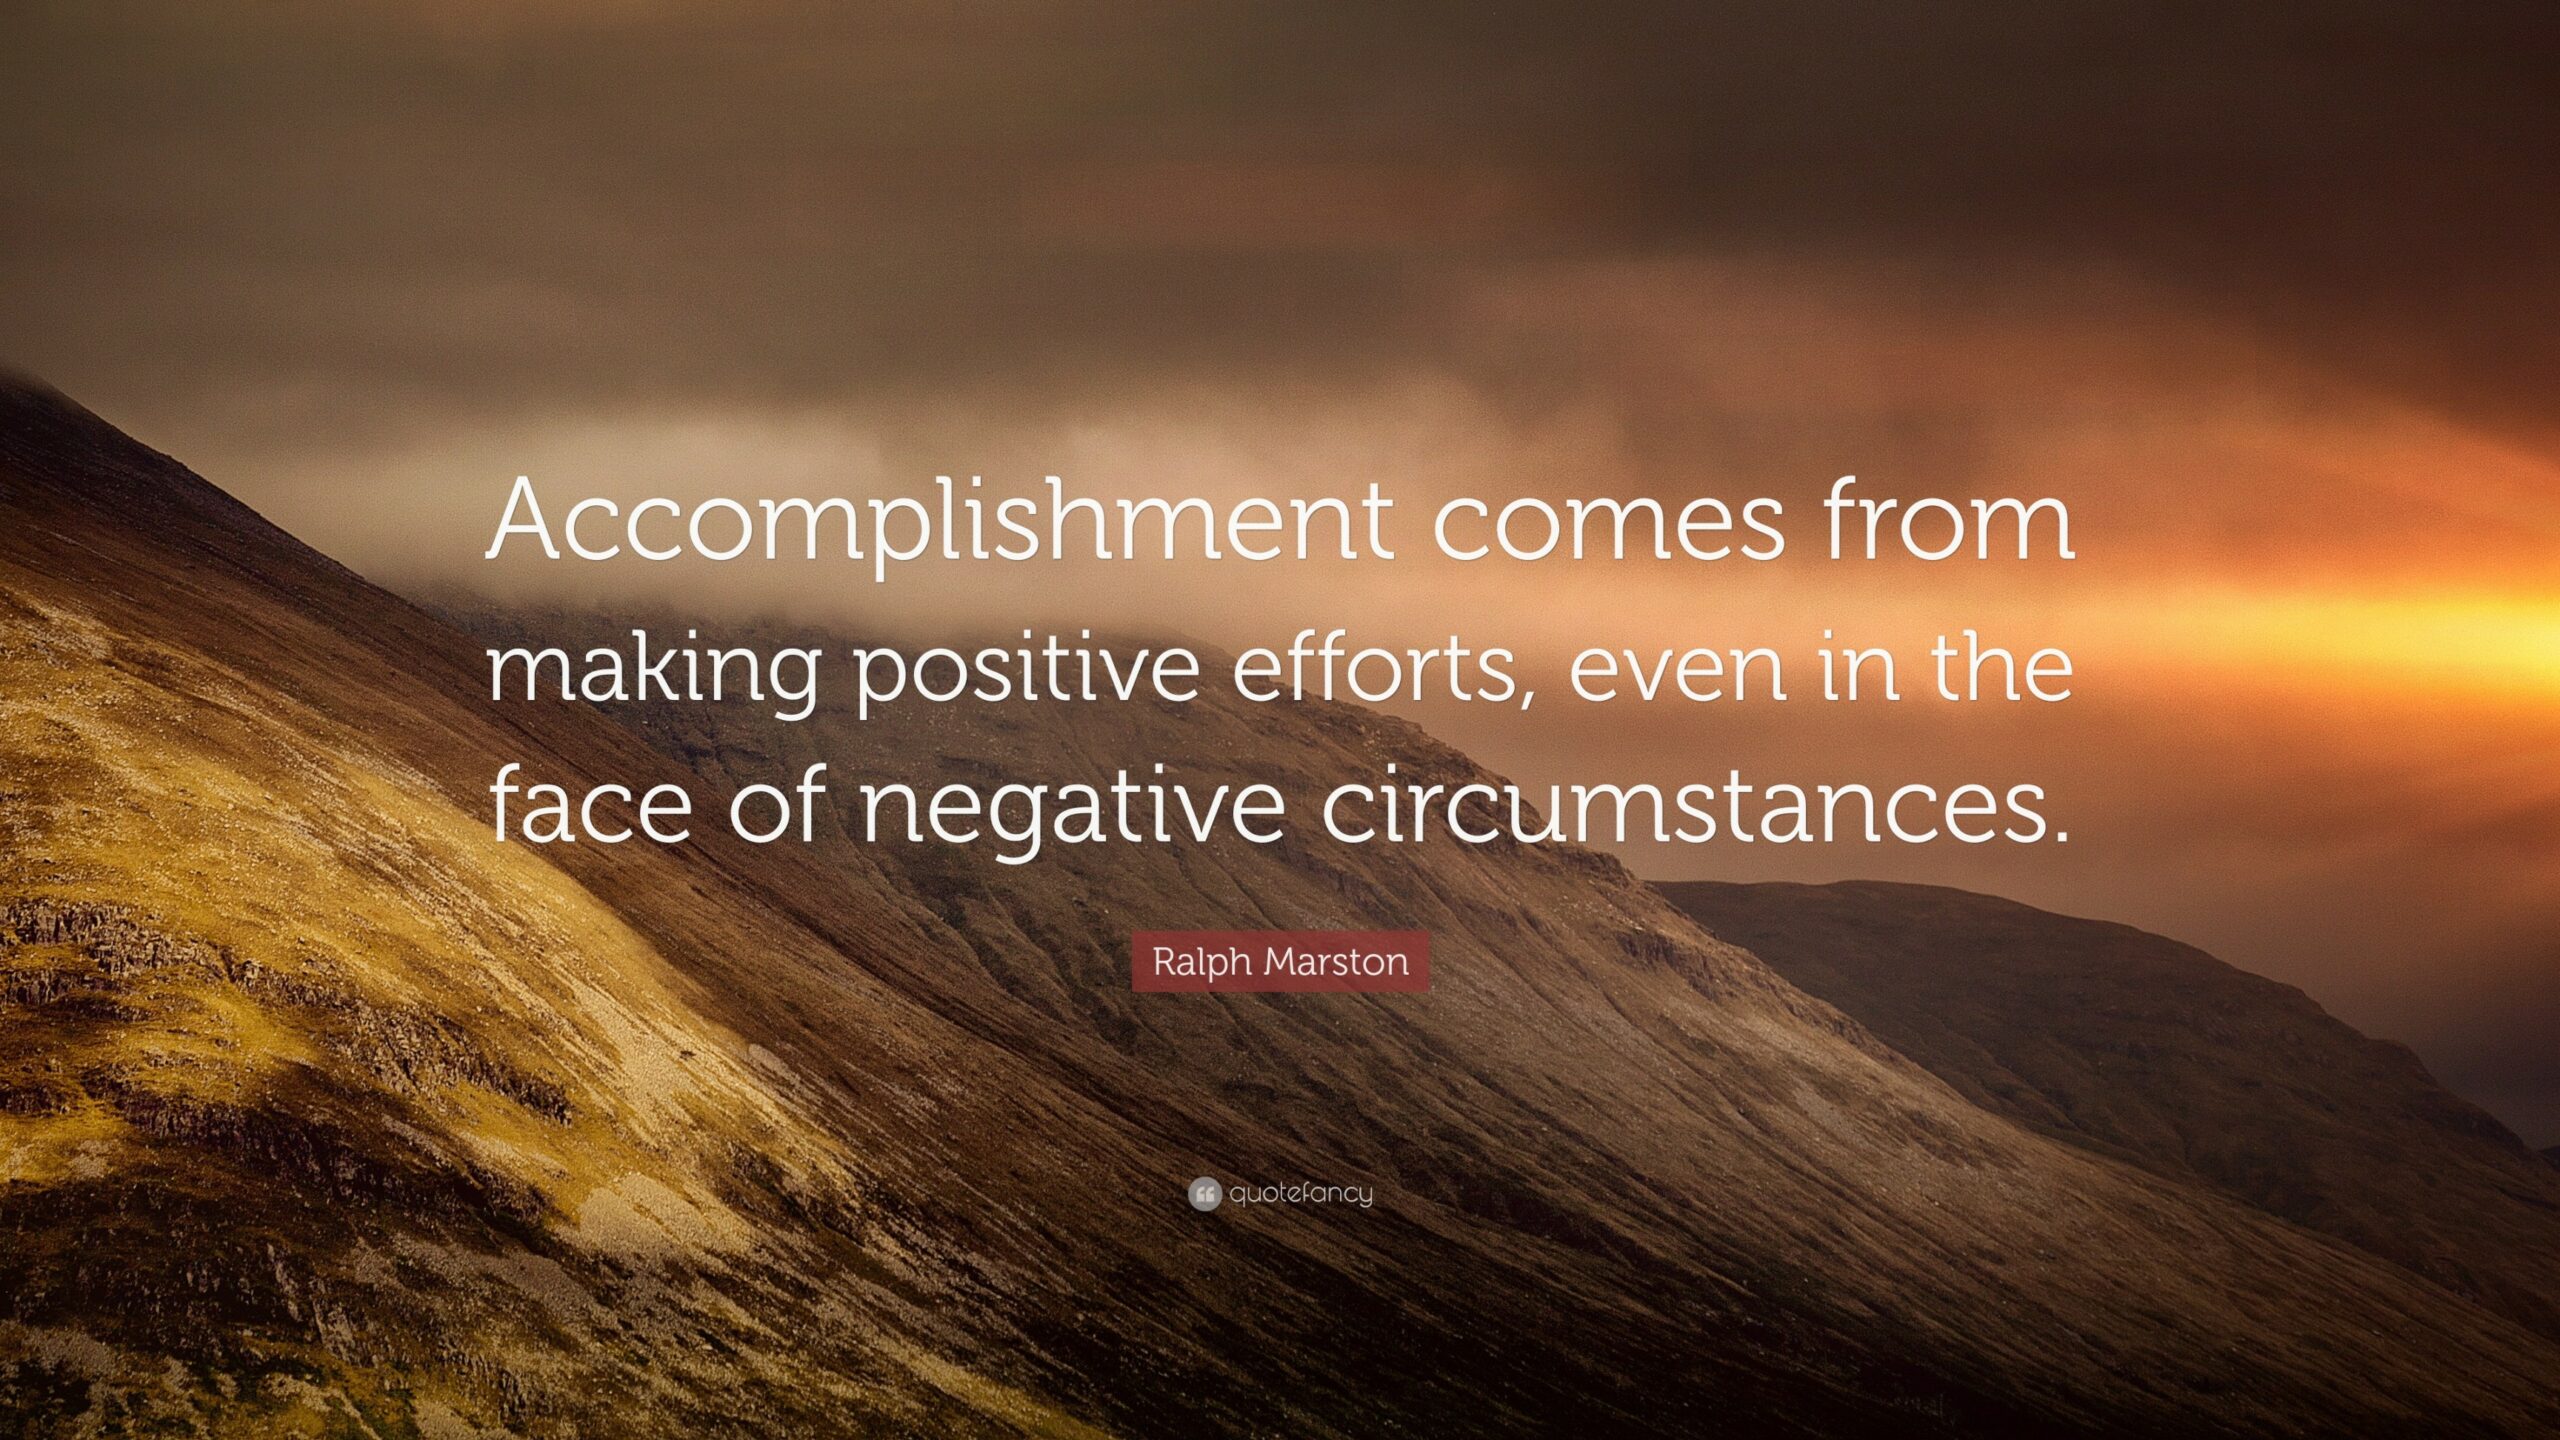 Ralph Marston Quote: “Accomplishment comes from making positive